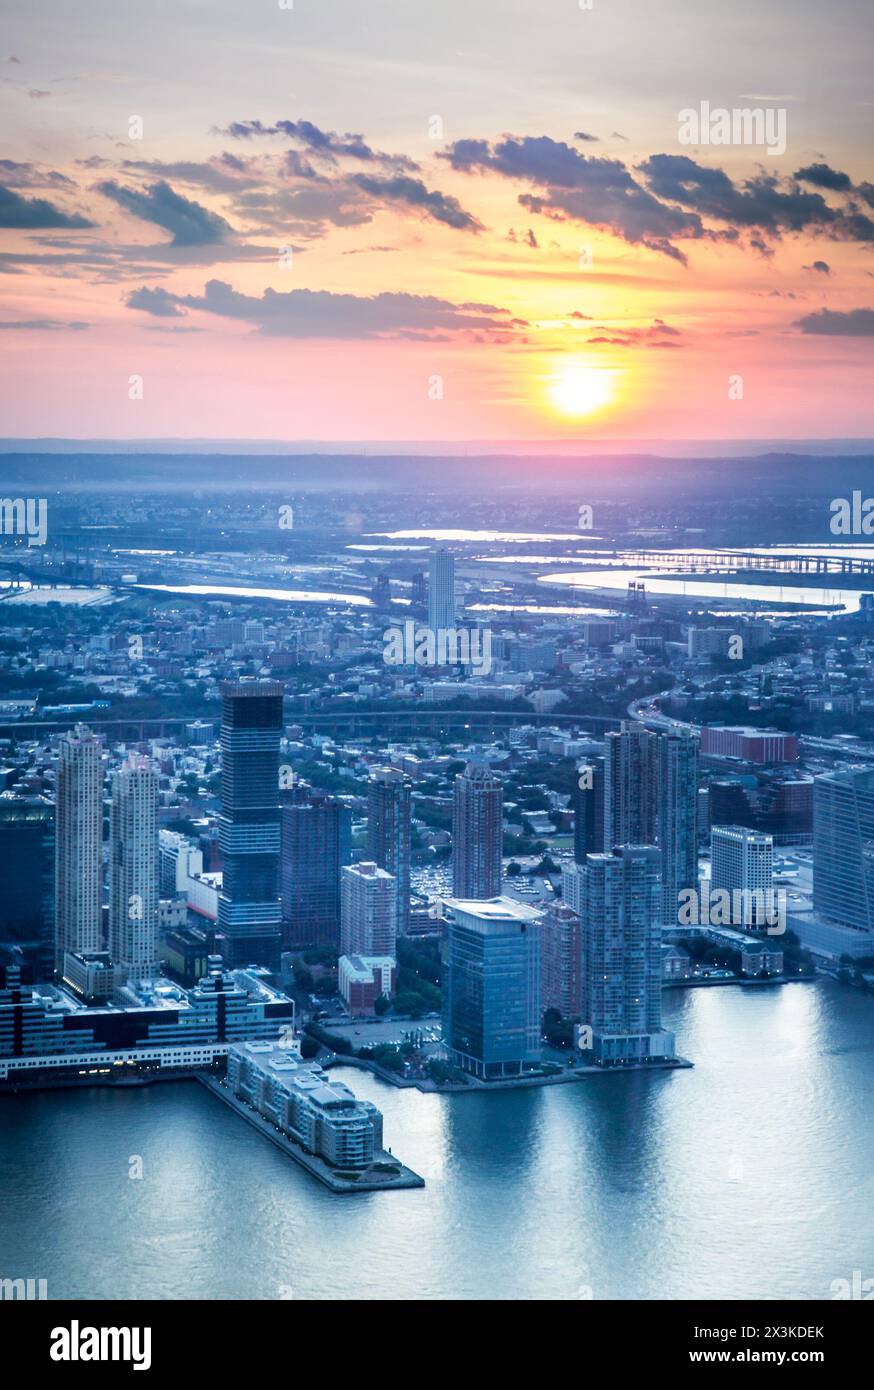 Jersey City skyline seen at sunset from above with colorful sunset Stock Photo